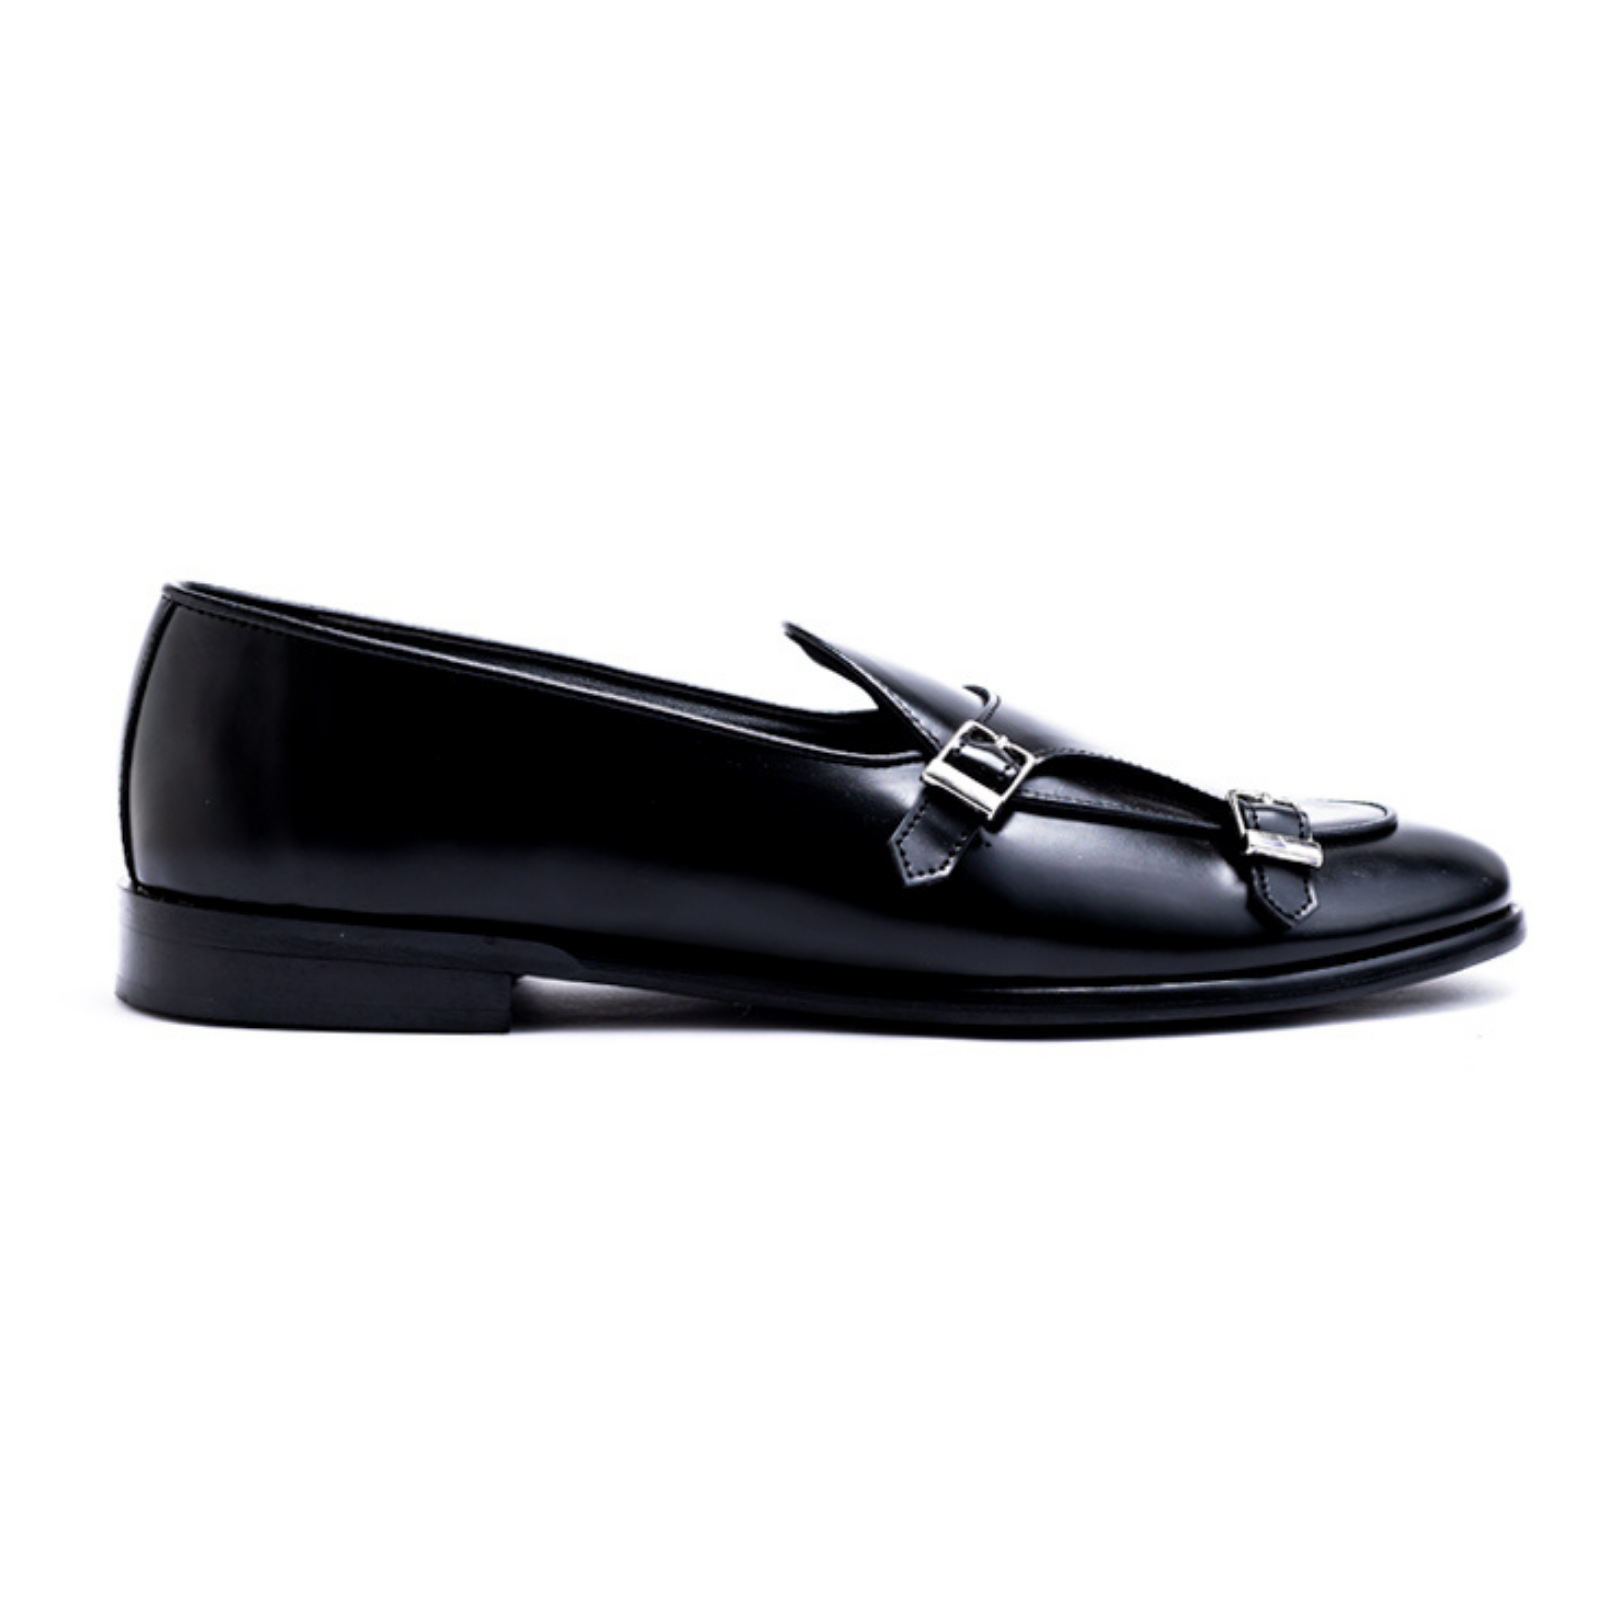 A black vegan leather loafer with metal buckles, perfect for those who love Monkstory - Luxious 2.0 Classic Double Monk Slip Ons.